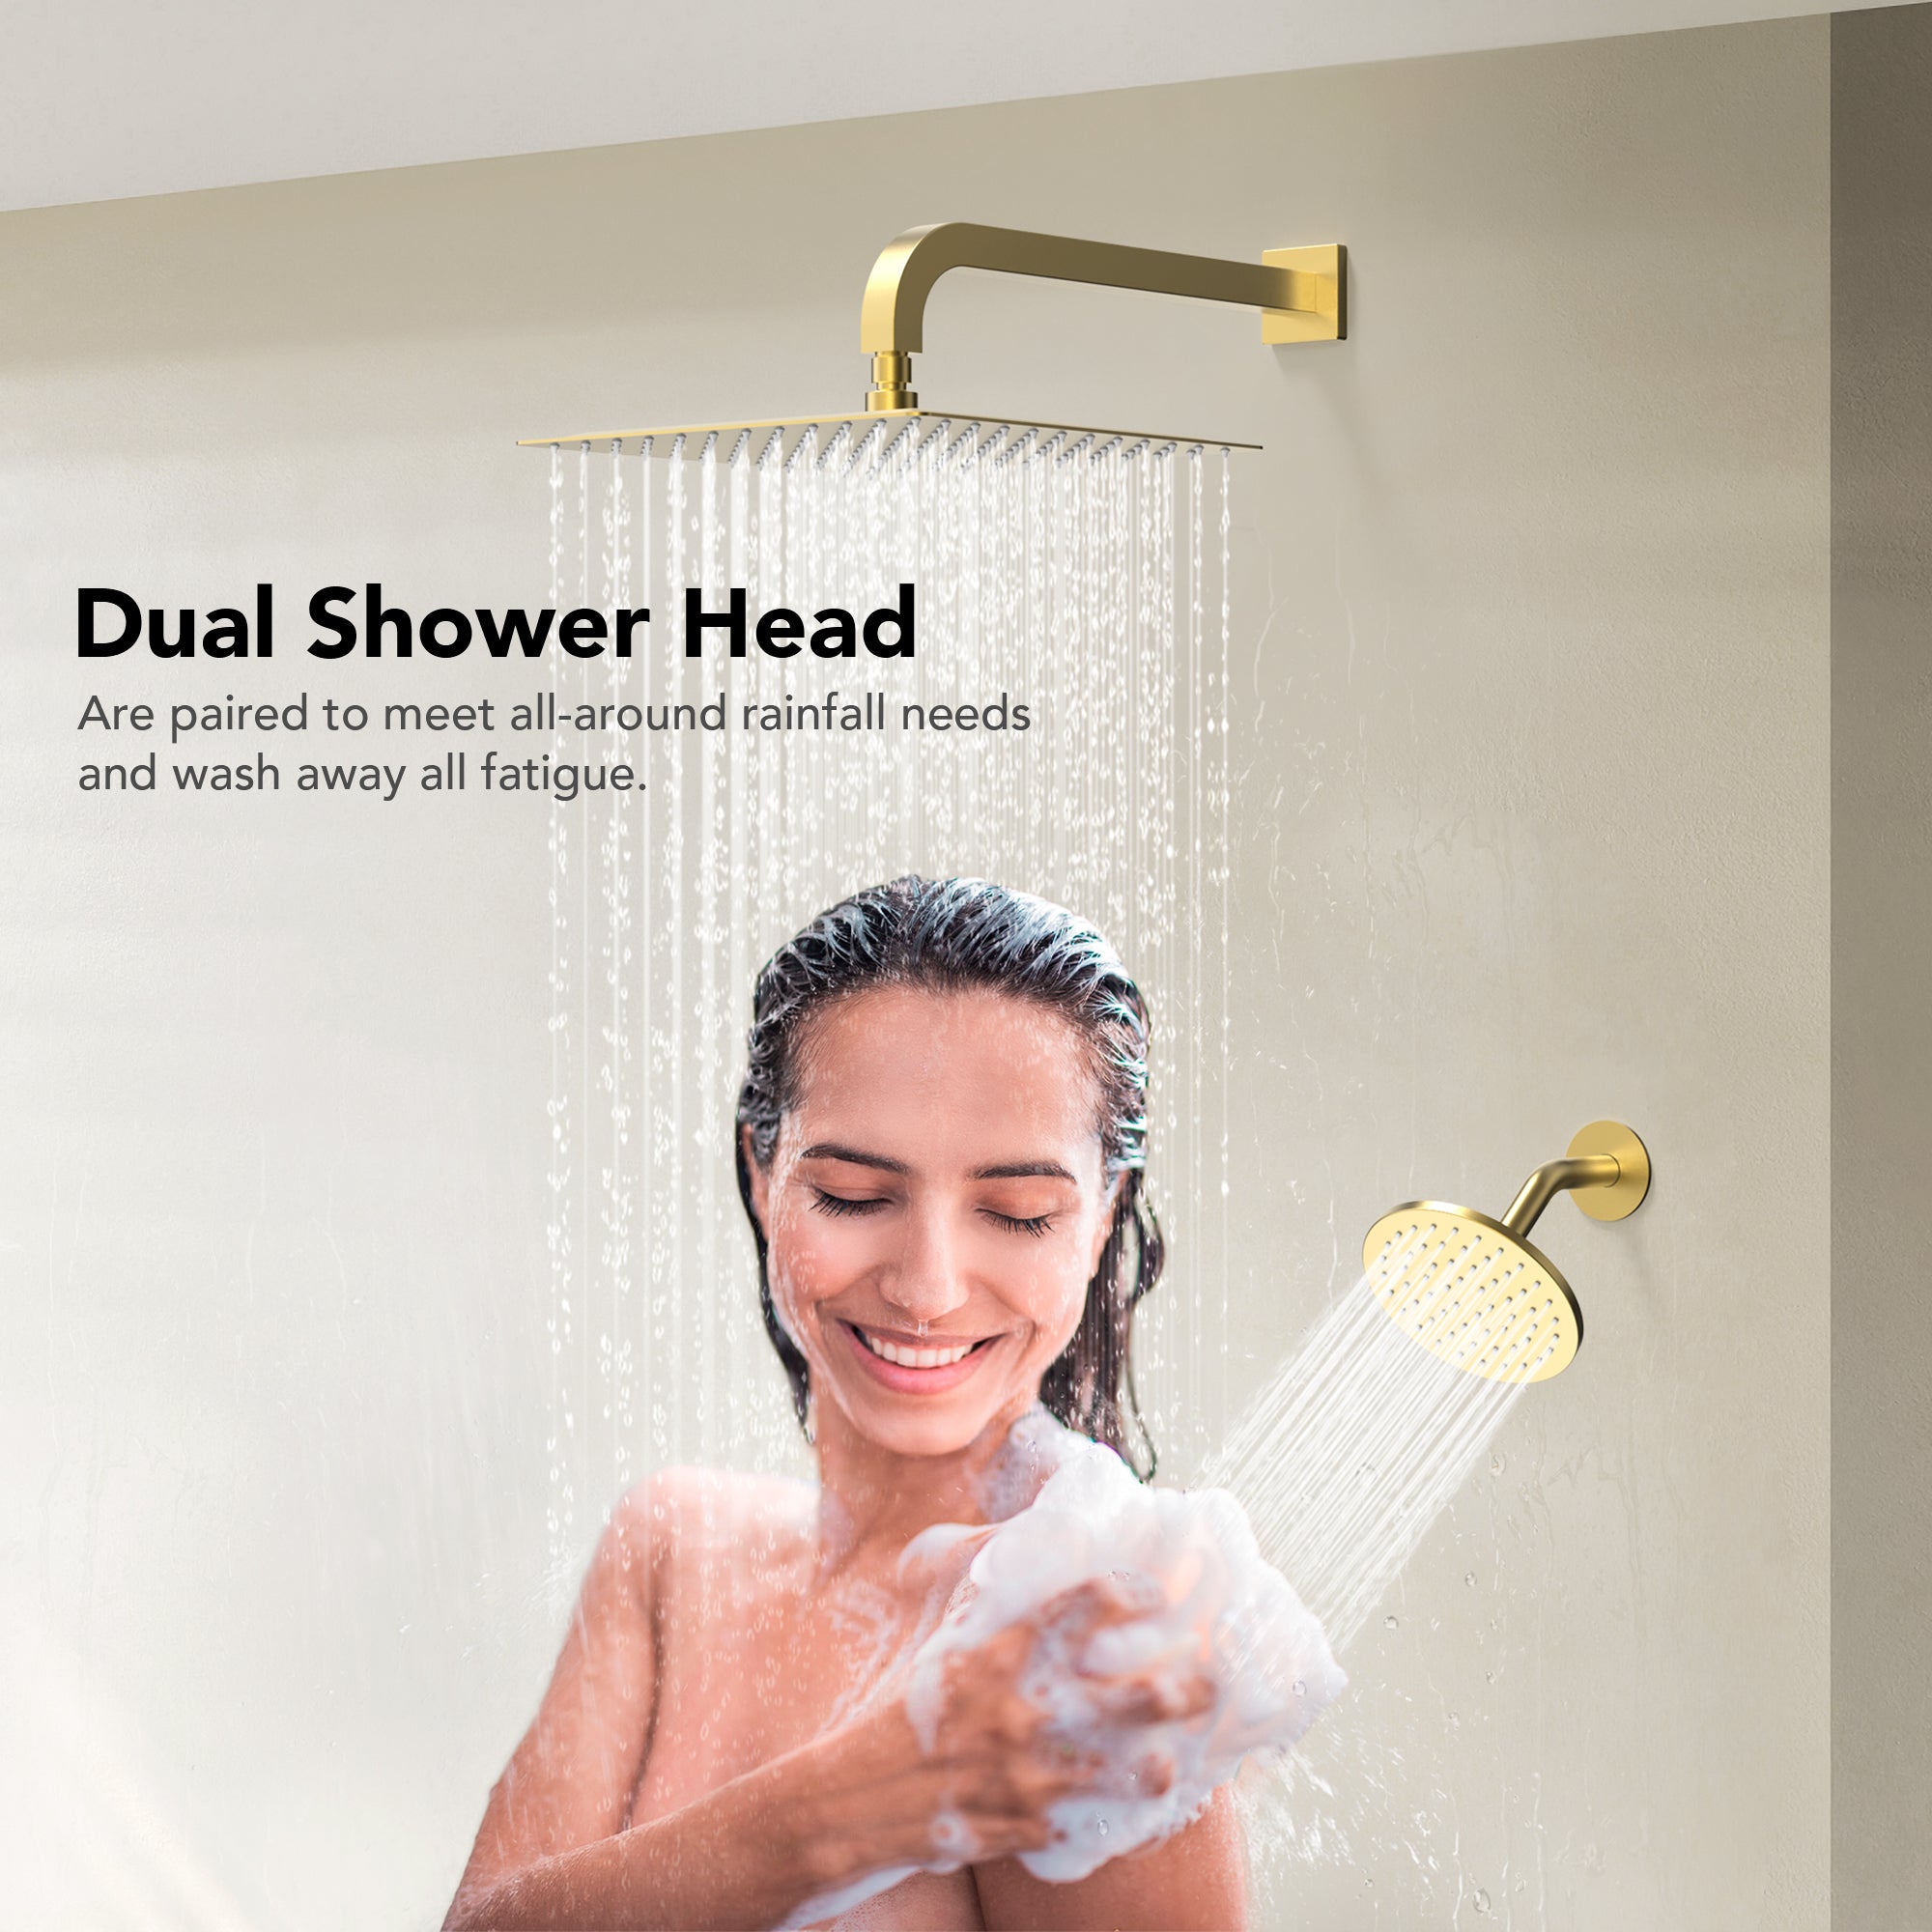 EVERSTEIN SFS-1065-GD12 12" High-Pressure Rainfall Complete Shower System with Rough-in Valve